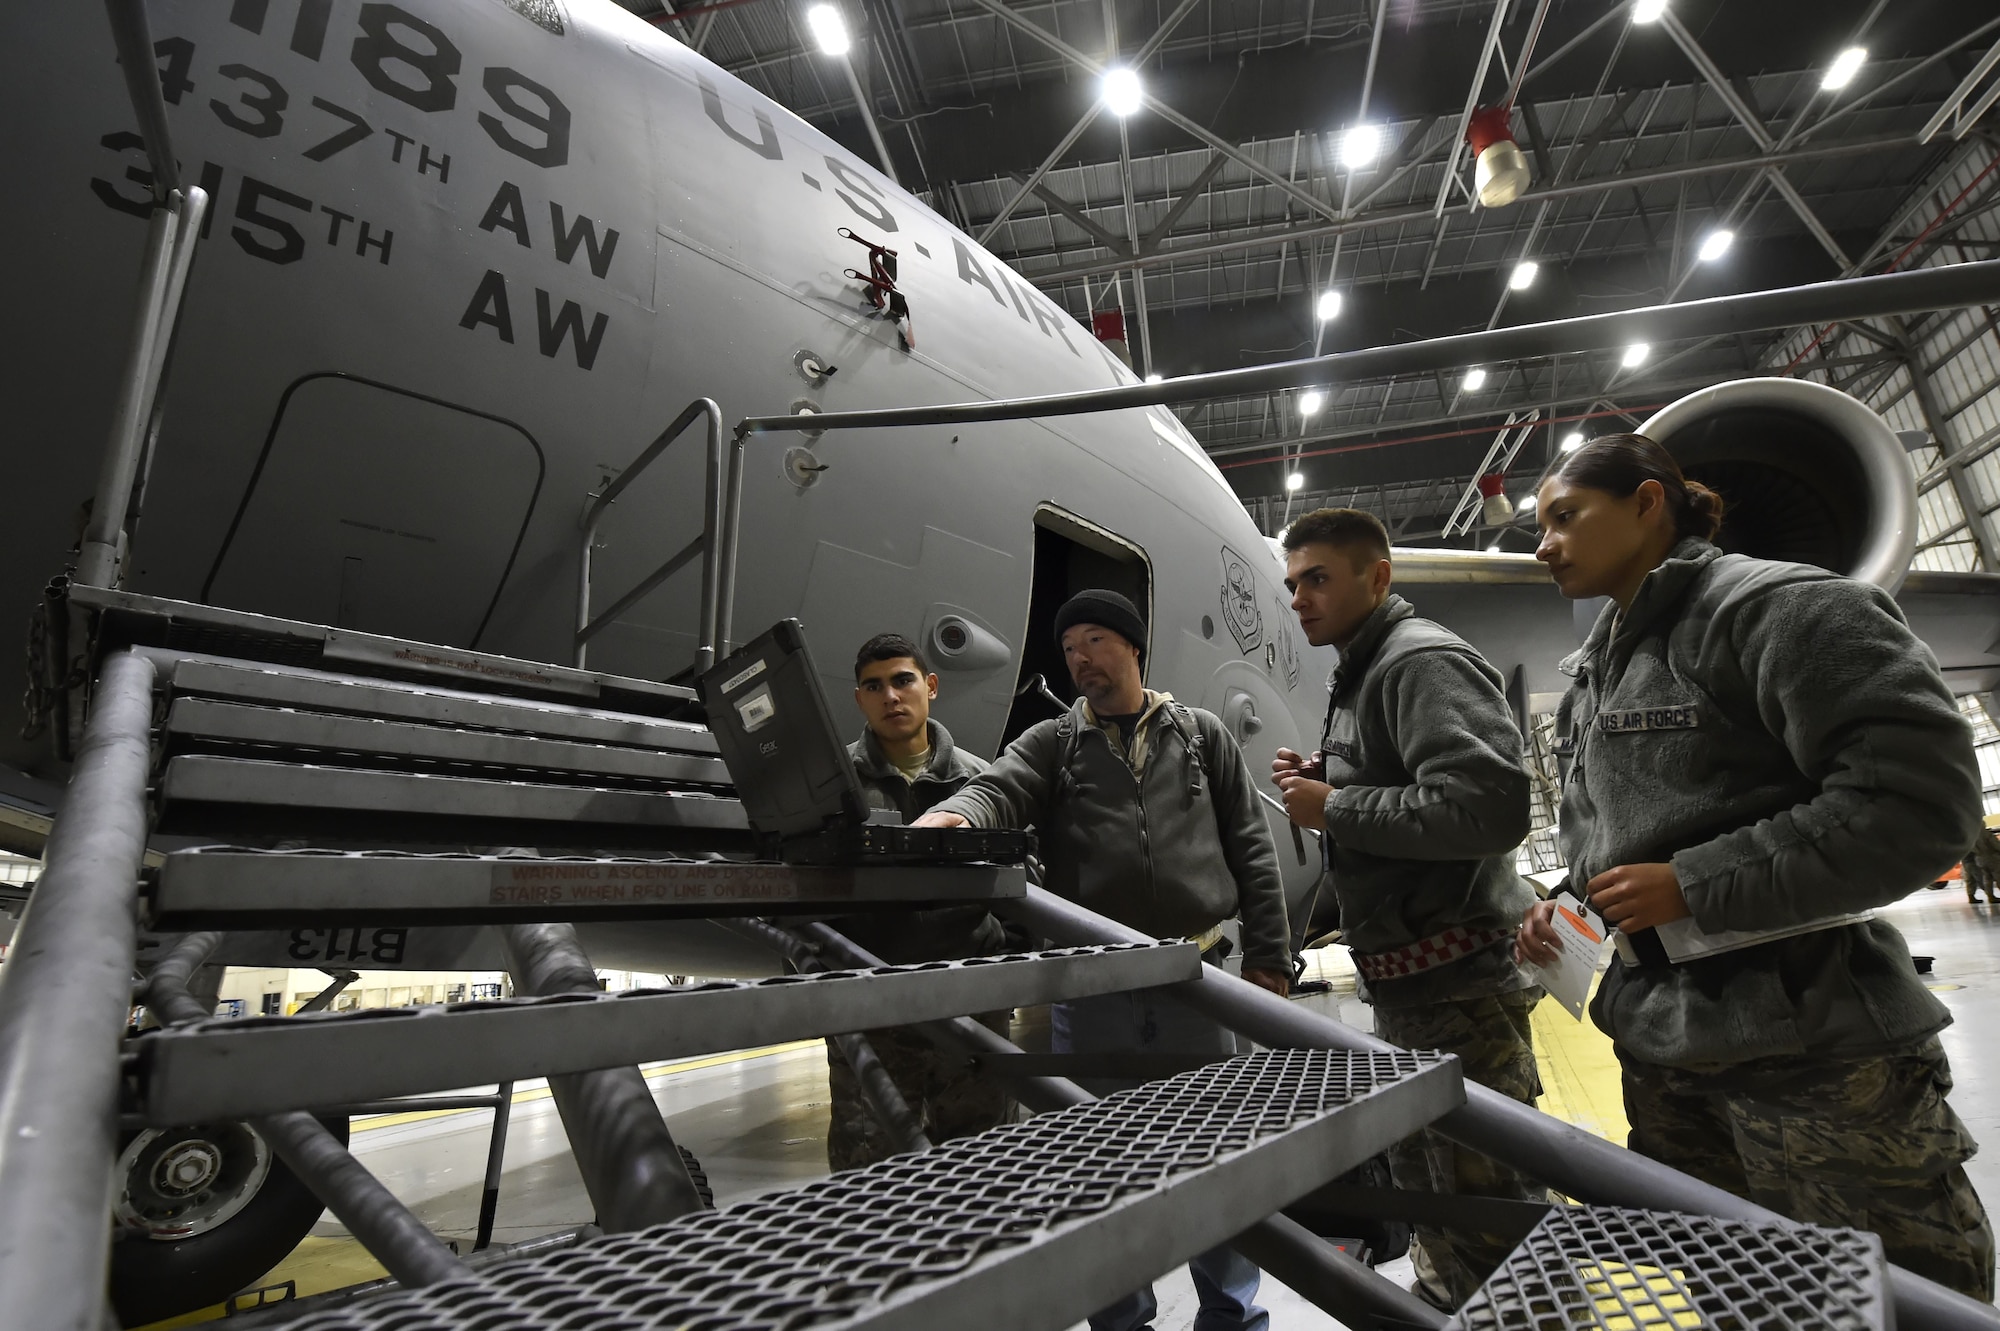 Members of the 437th Aircraft Maintenance Squadron perform ground maintenance on a C-17 Globemaster in preparation for a Joint Forcible Entry training event in support of the U.S. Air Force Weapons School Integration phase Dec. 8. Thirty seven C-17s, 21 C-130 Hercules and 120 U.S. Army paratroopers participated in the mobility portion of the WSINT phase during a simulated mass JFE event over a contested target Dec. 9, on a range near Nellis Air Force Base, Nev. The event demonstrates the U.S. Air Force’s ability to execute rapid, decisive responses to crises worldwide.